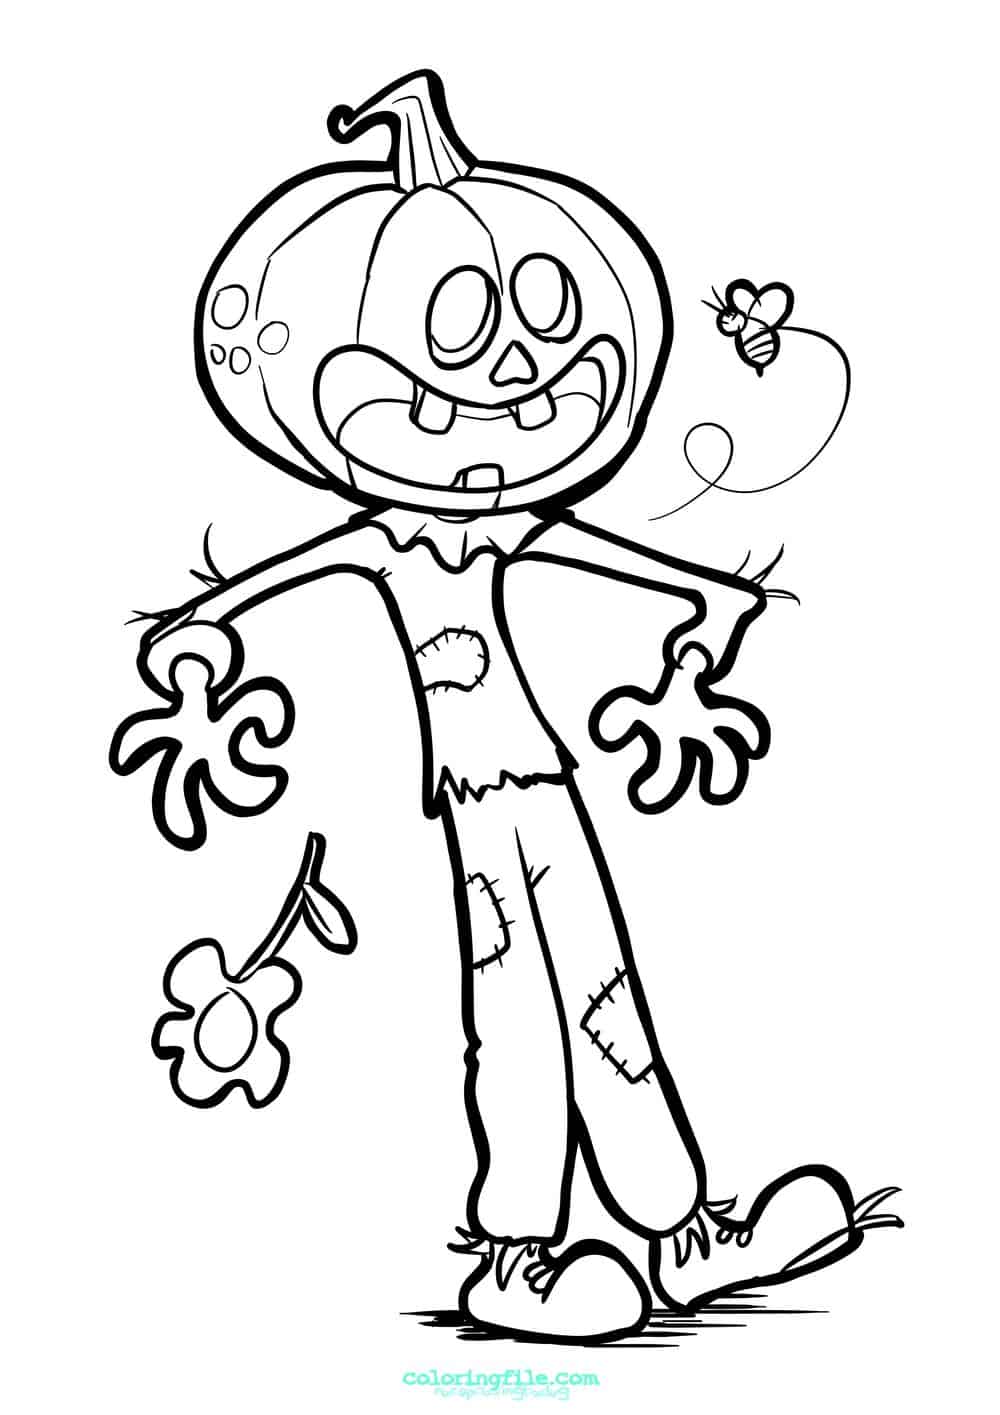 Halloween pumpkin scarecrow coloring pages